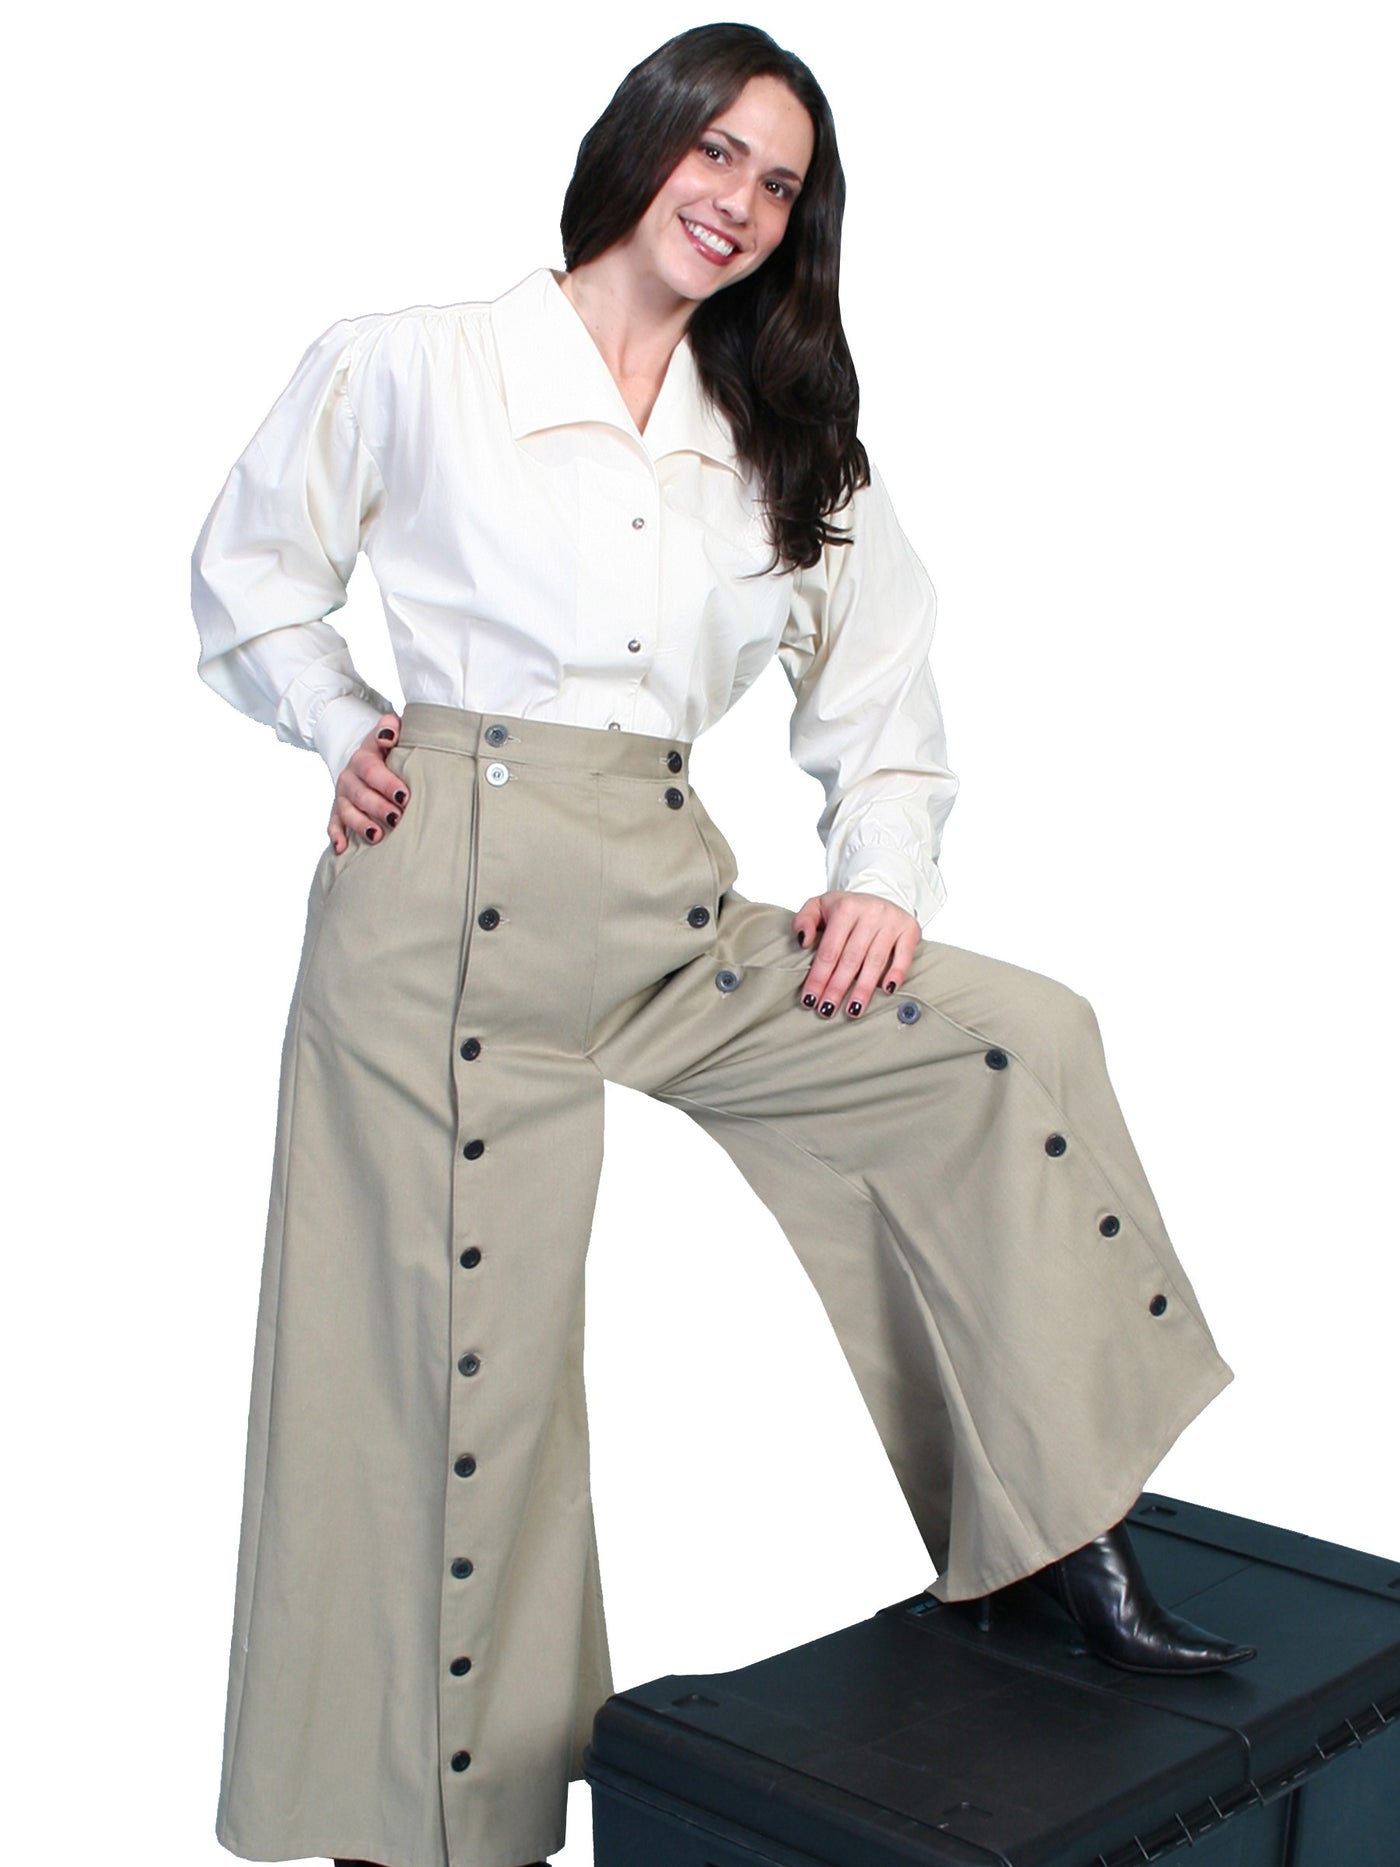 Country Girl Riding Pants in Tan - SOLD OUT